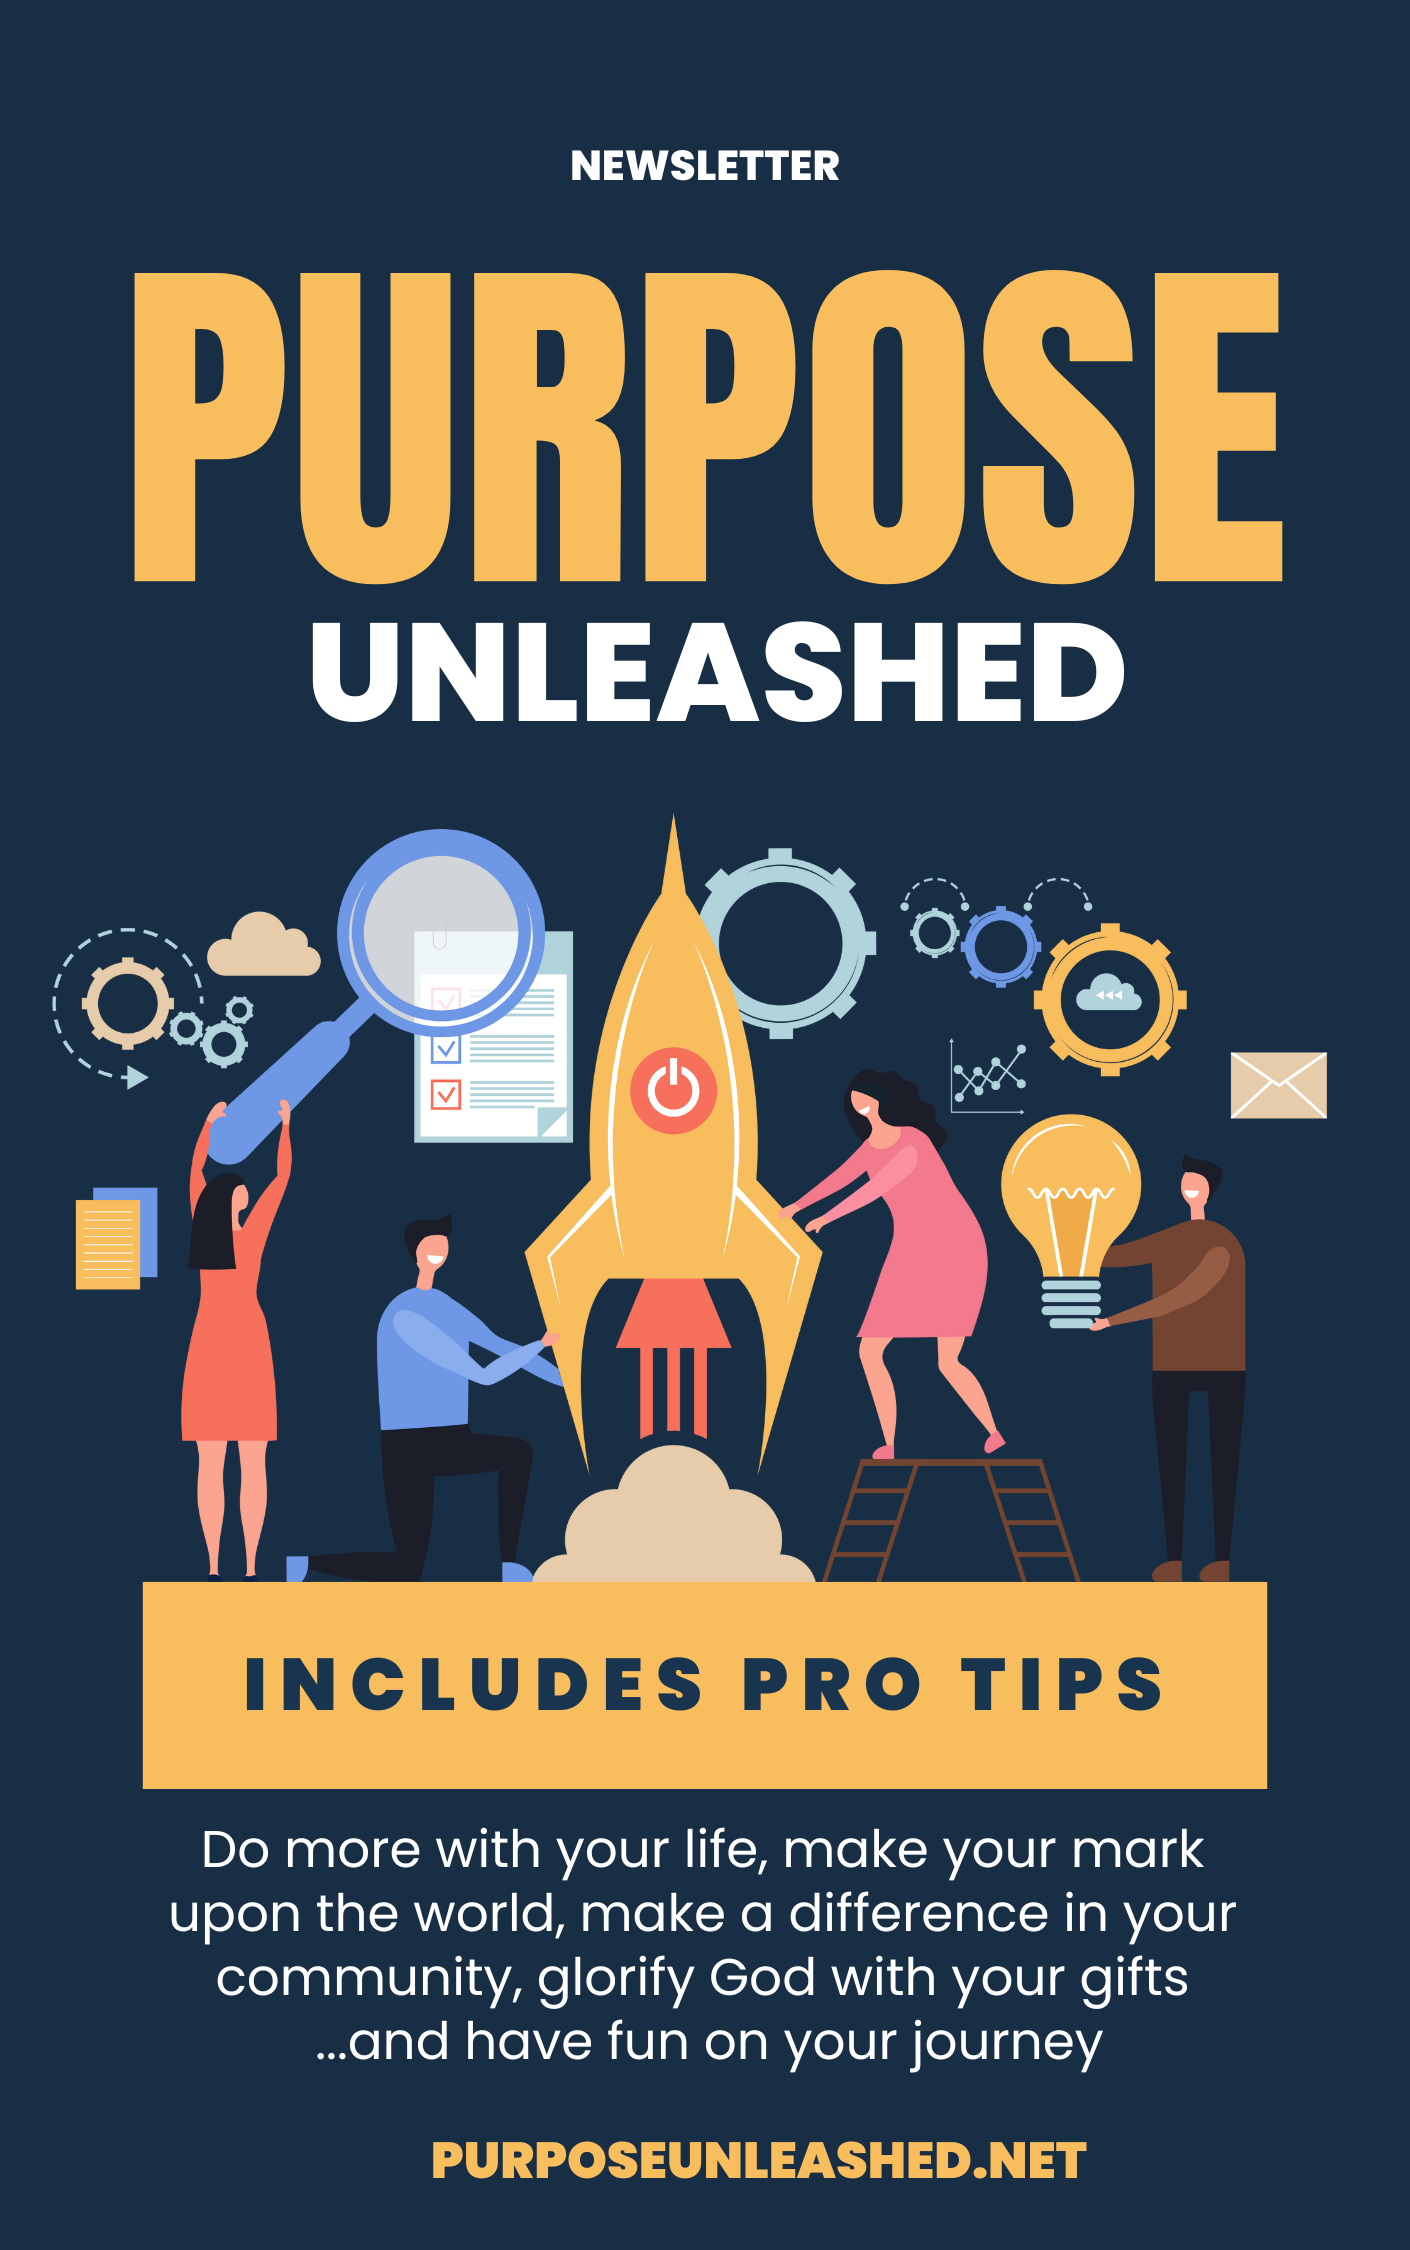 Purpose Unleashed Newsletter